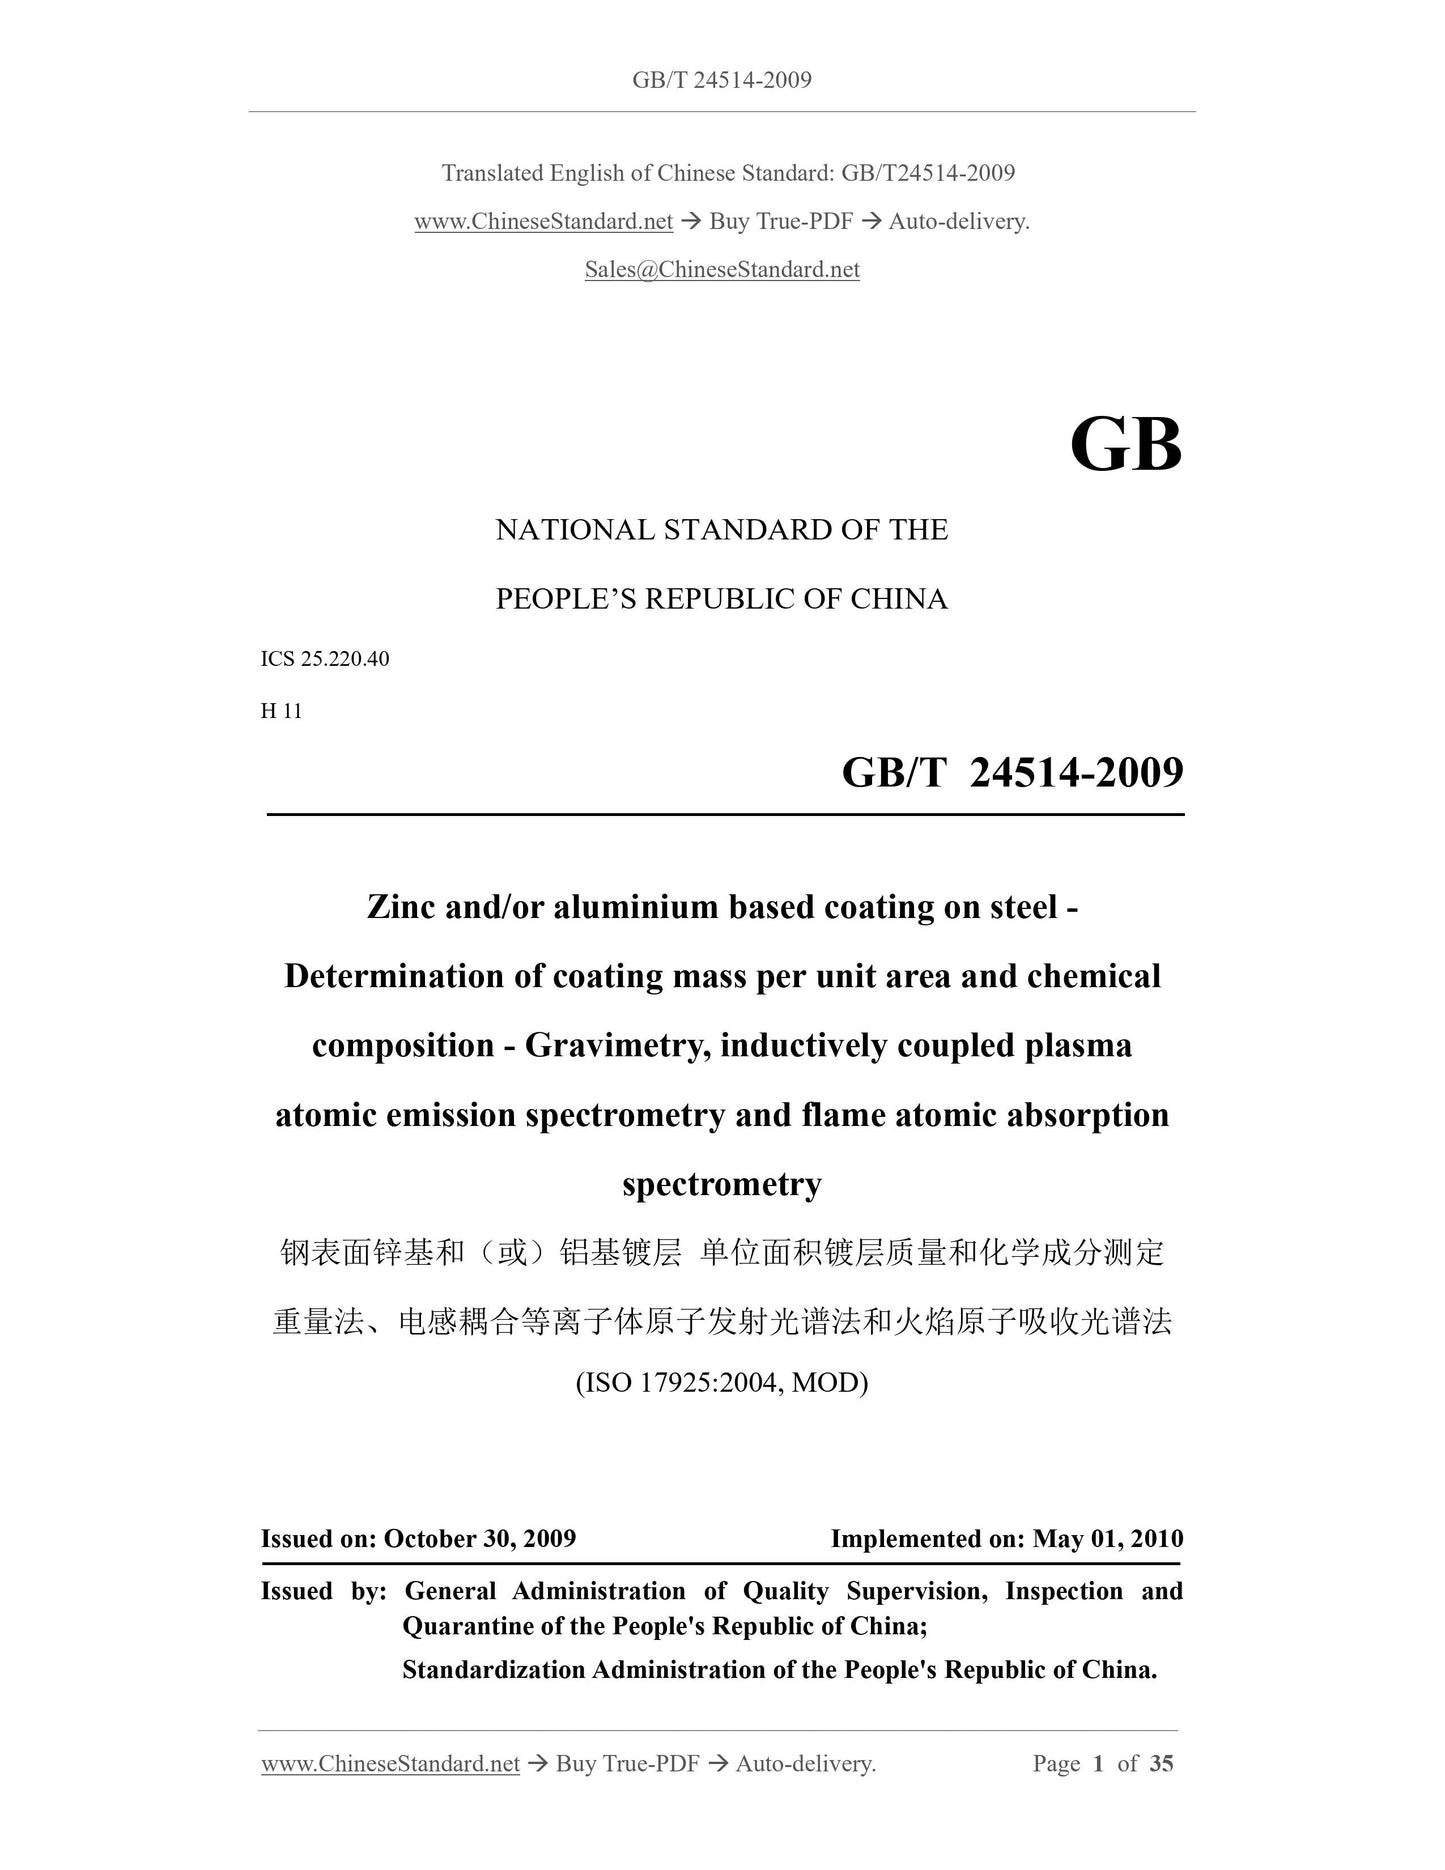 GB/T 24514-2009 Page 1